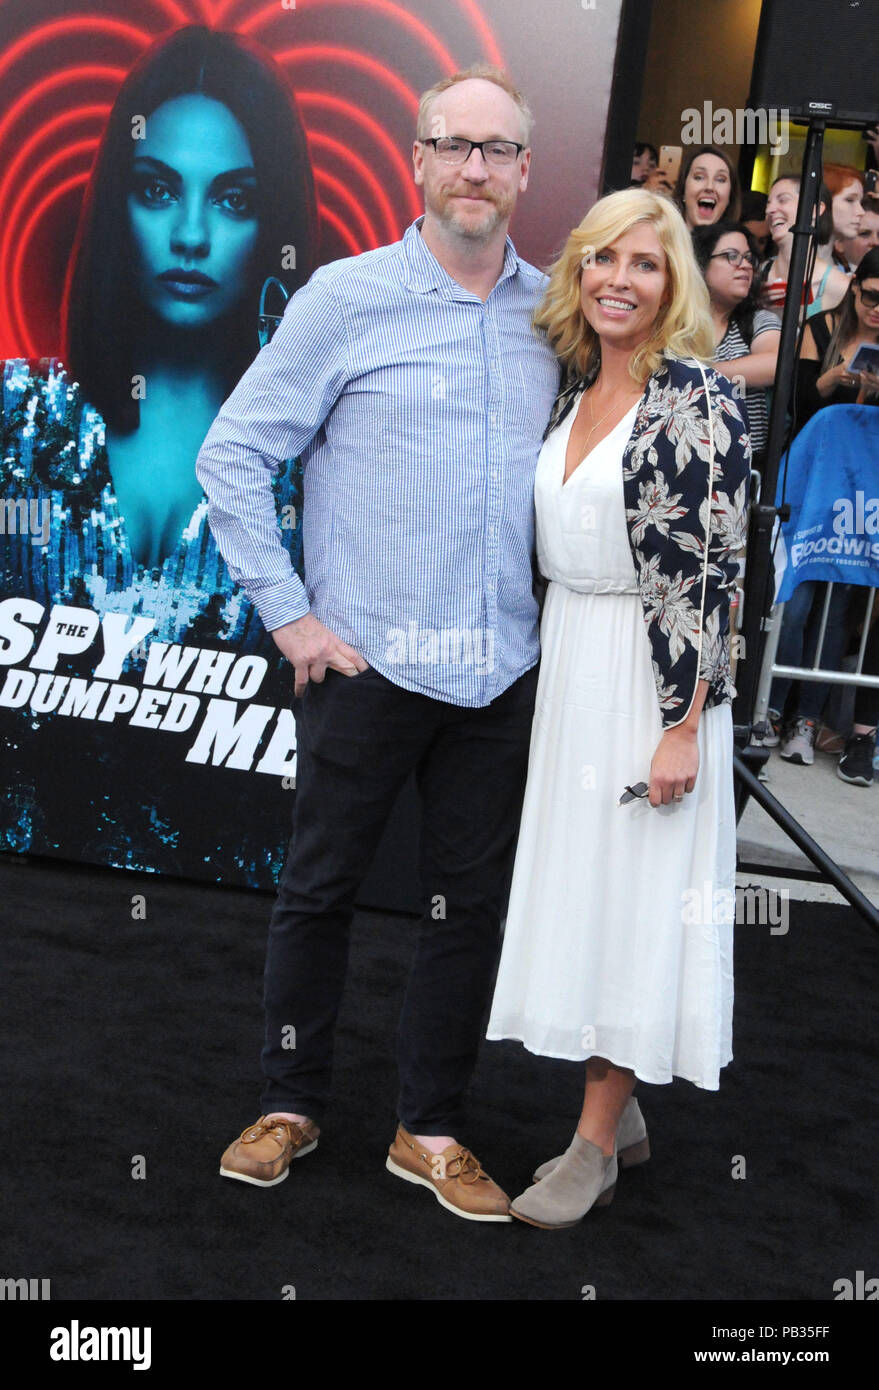 LOS ANGELES, CA - JULY 25: Actor Matt Walsh and wife Morgan Walsh attend the World Premiere of Lionsgate's' 'The Spy Who Dumped Me' on July 25, 2018 at Fox Village Theatre in Los Angeles, California. Photo by Barry King/Alamy Live News Stock Photo